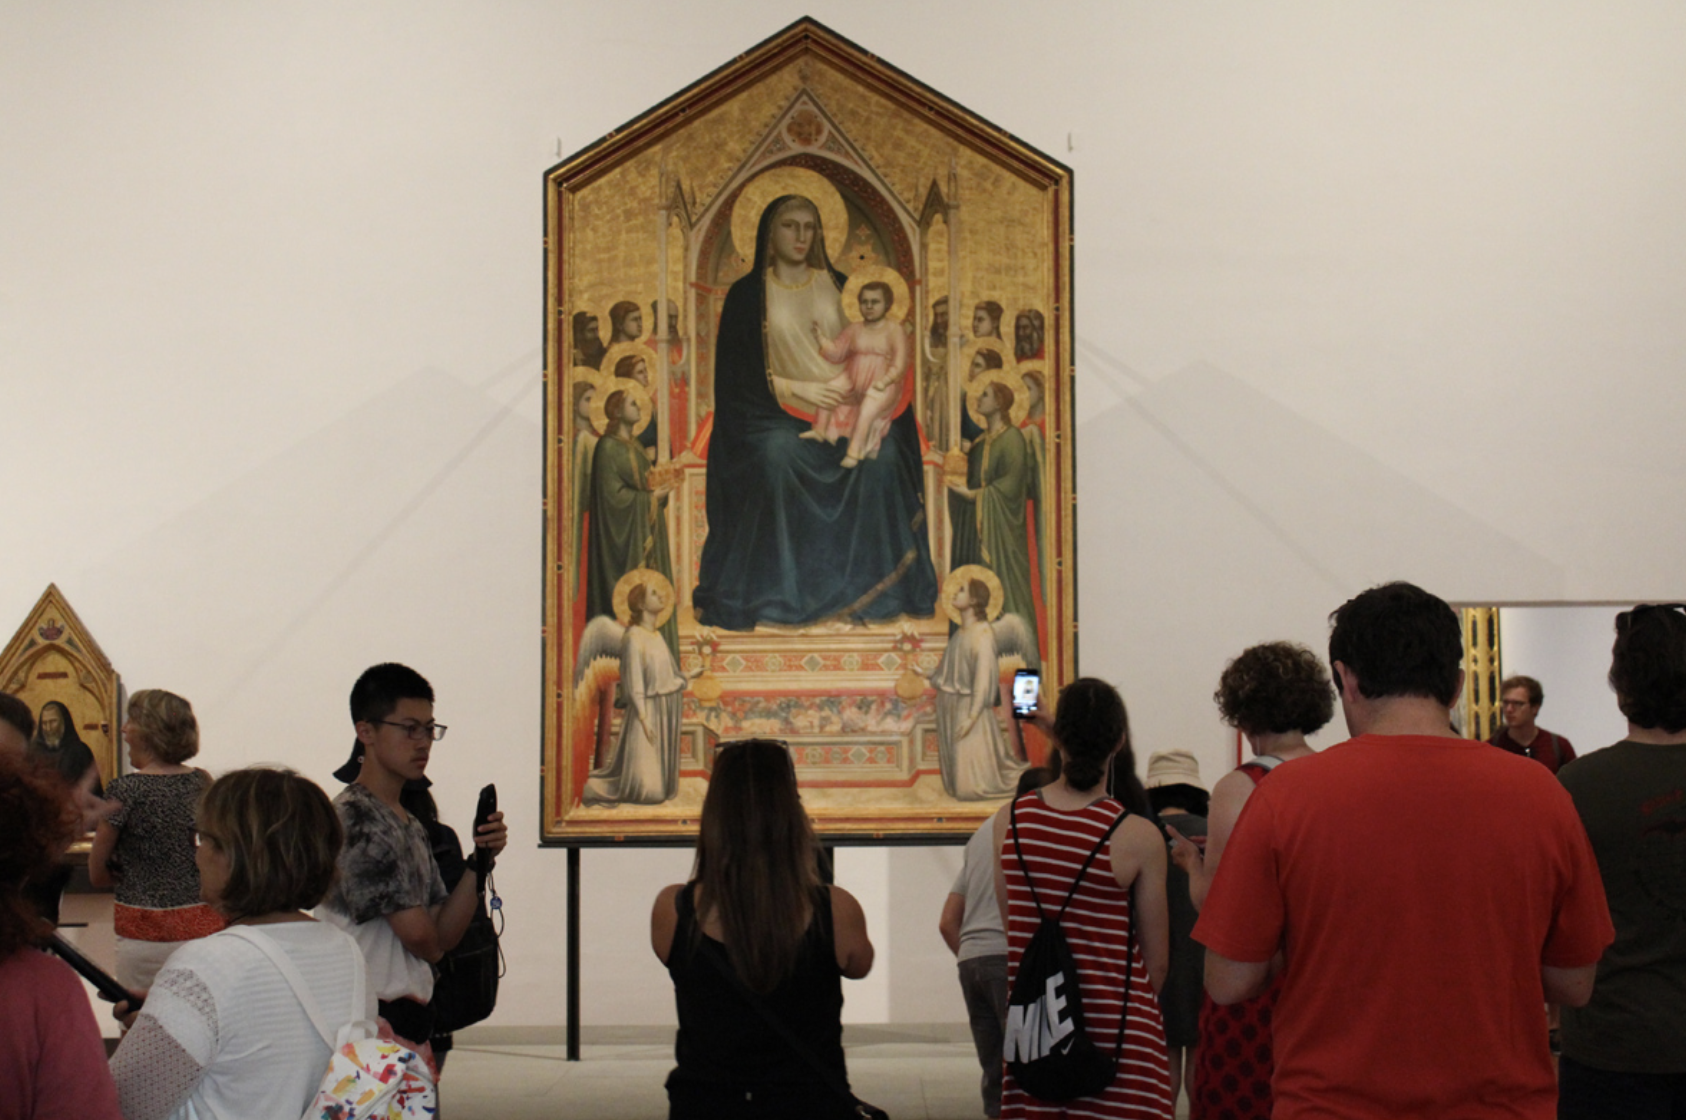 Uffizi Gallery — Giotto and the Middle Ages